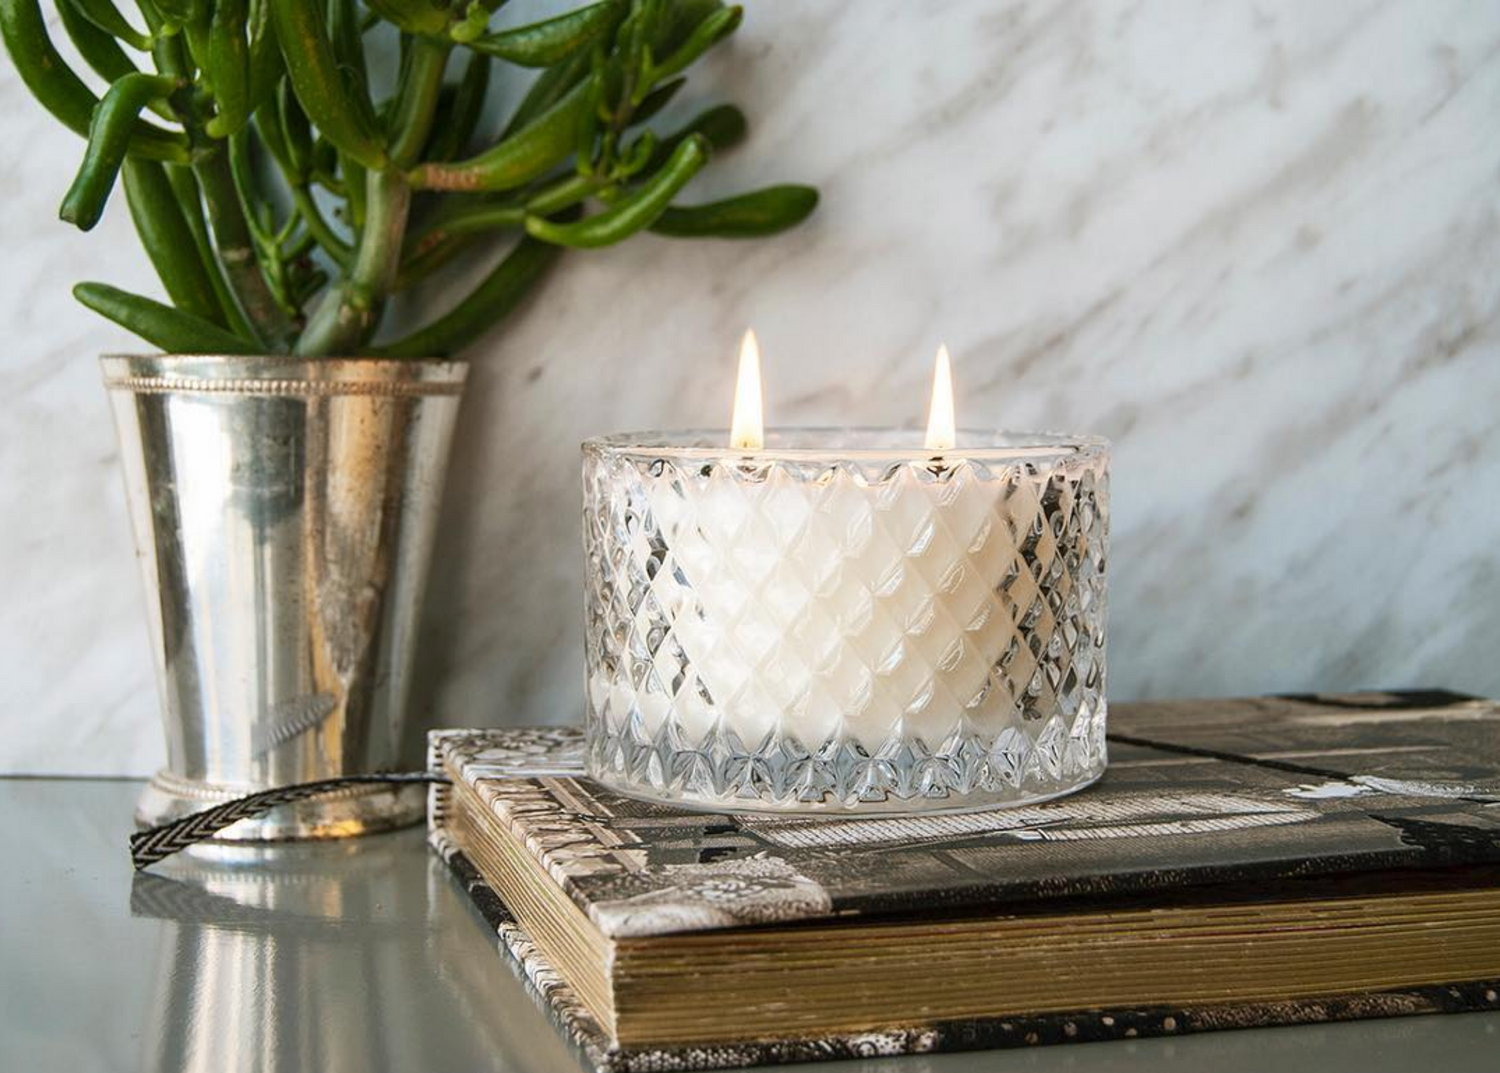 The multi-facetted starlet clear glass candle